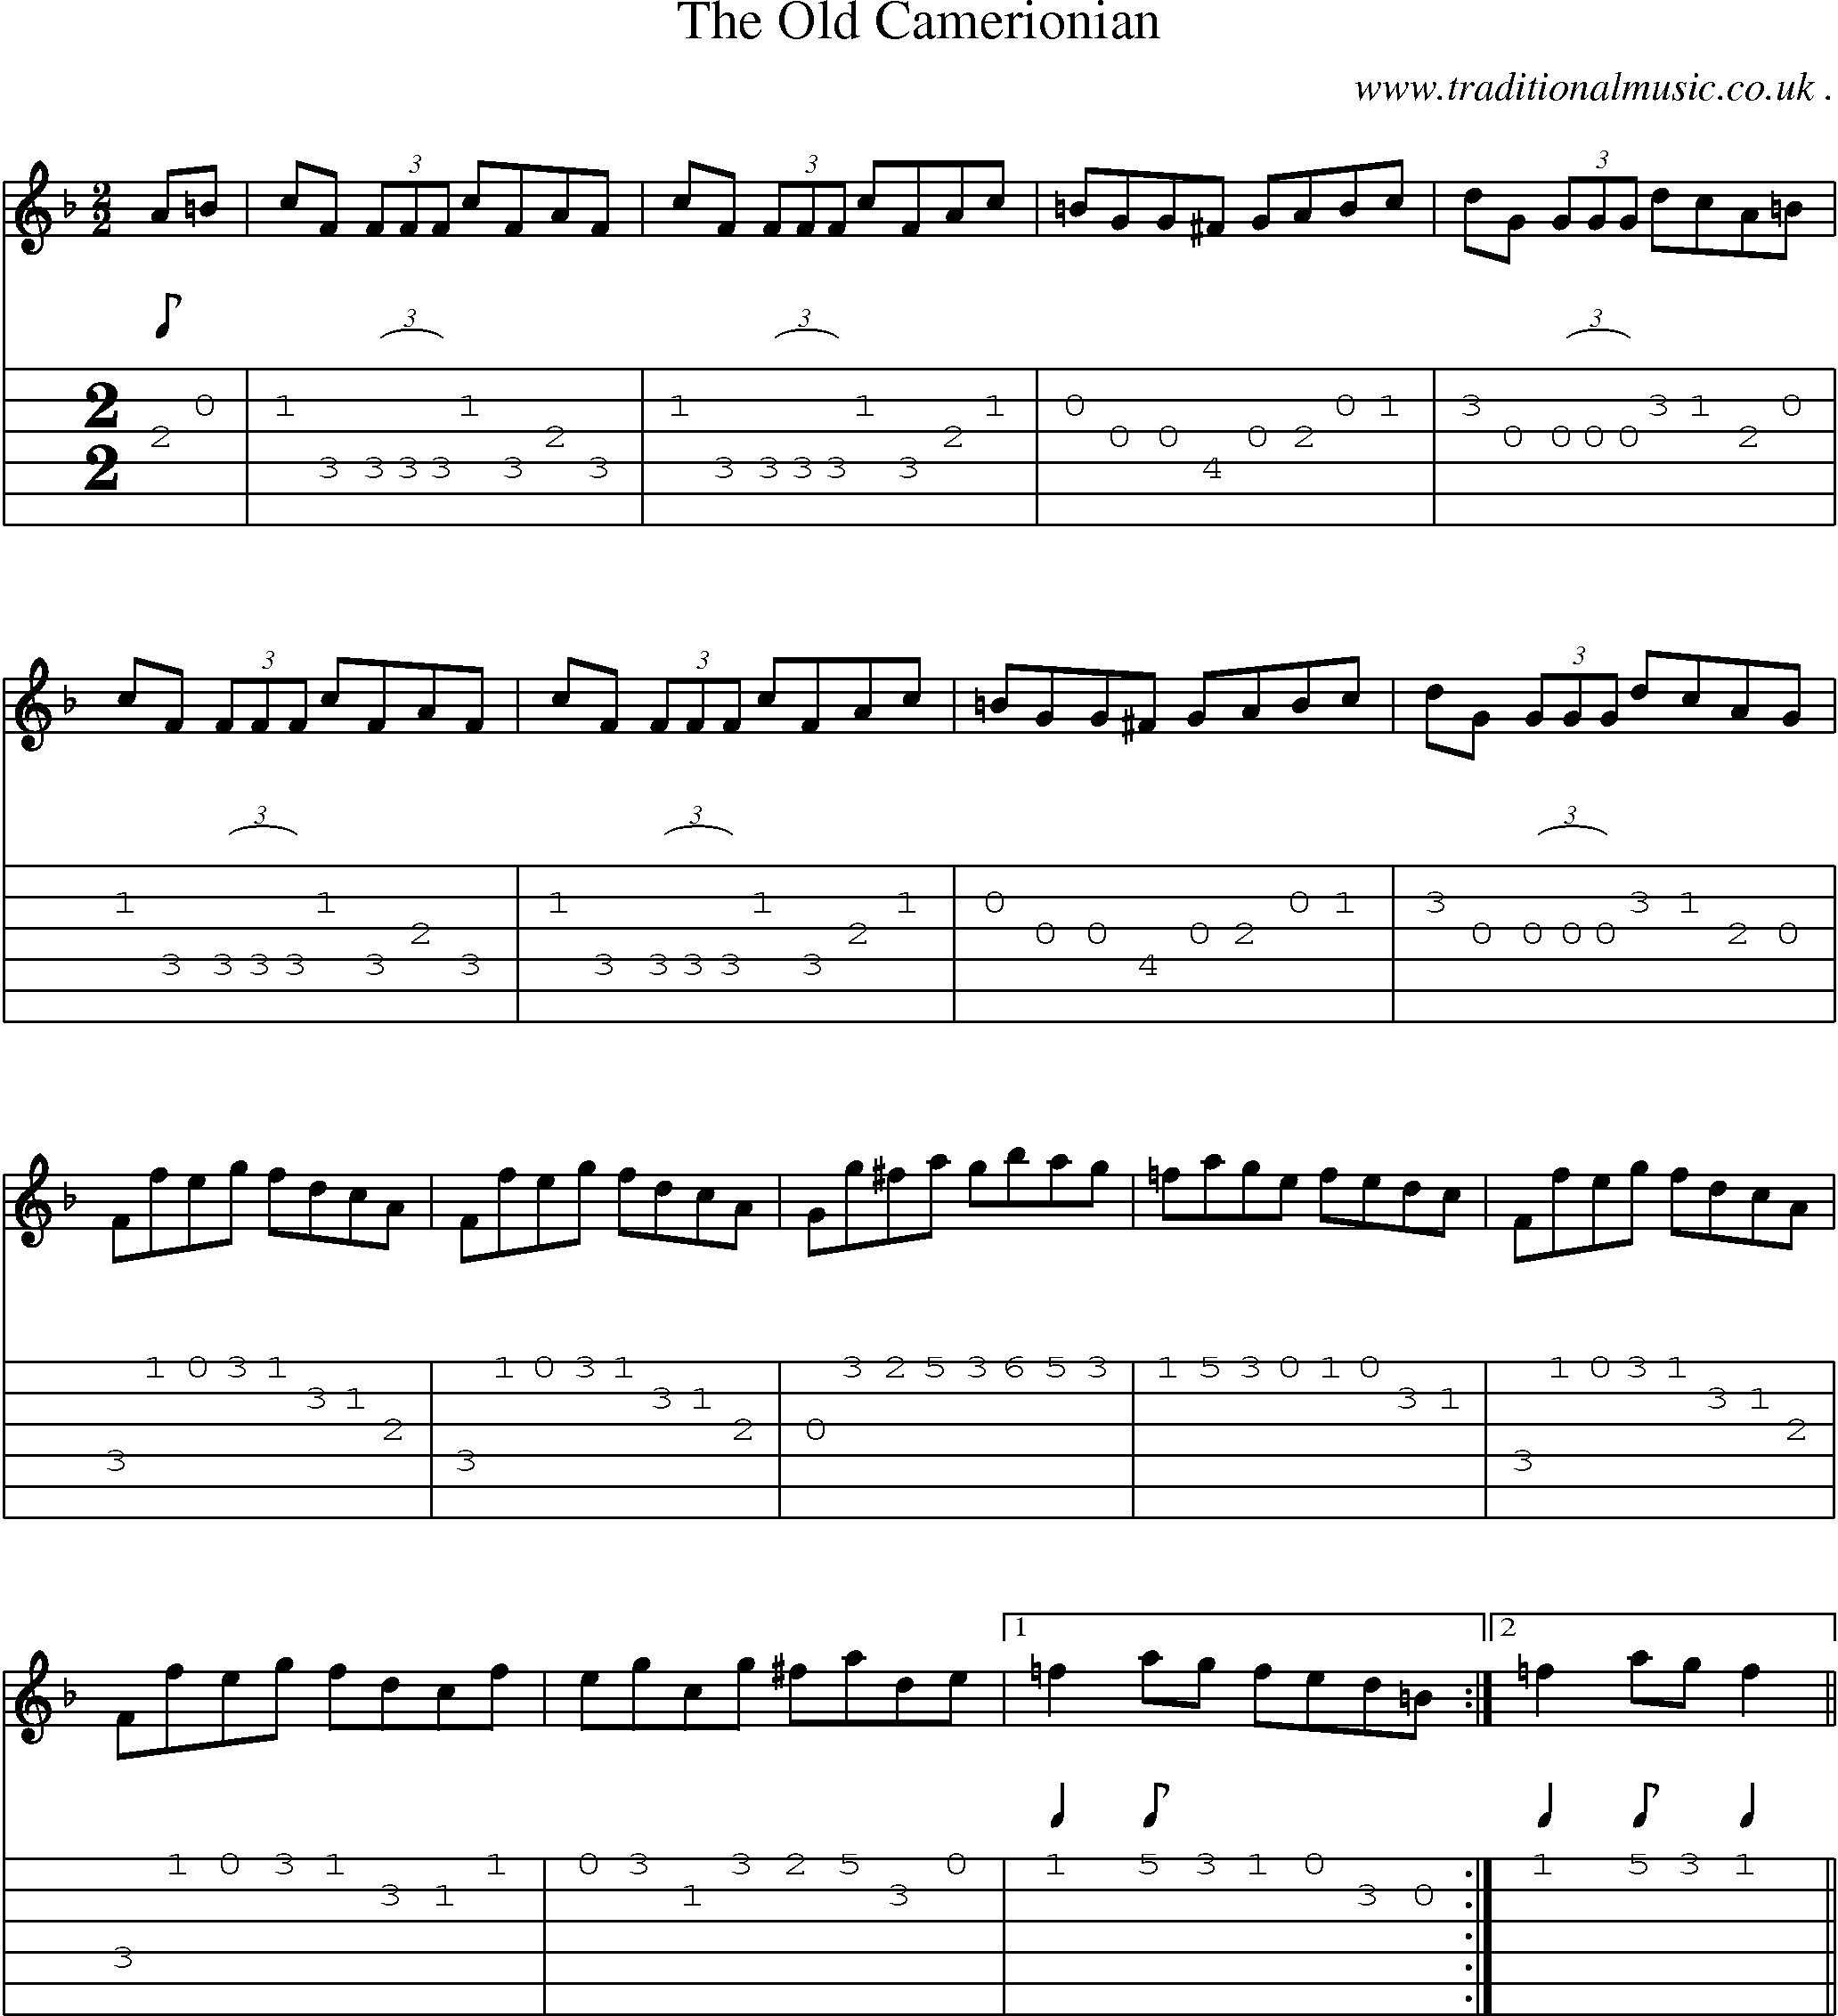 Sheet-Music and Guitar Tabs for The Old Camerionian